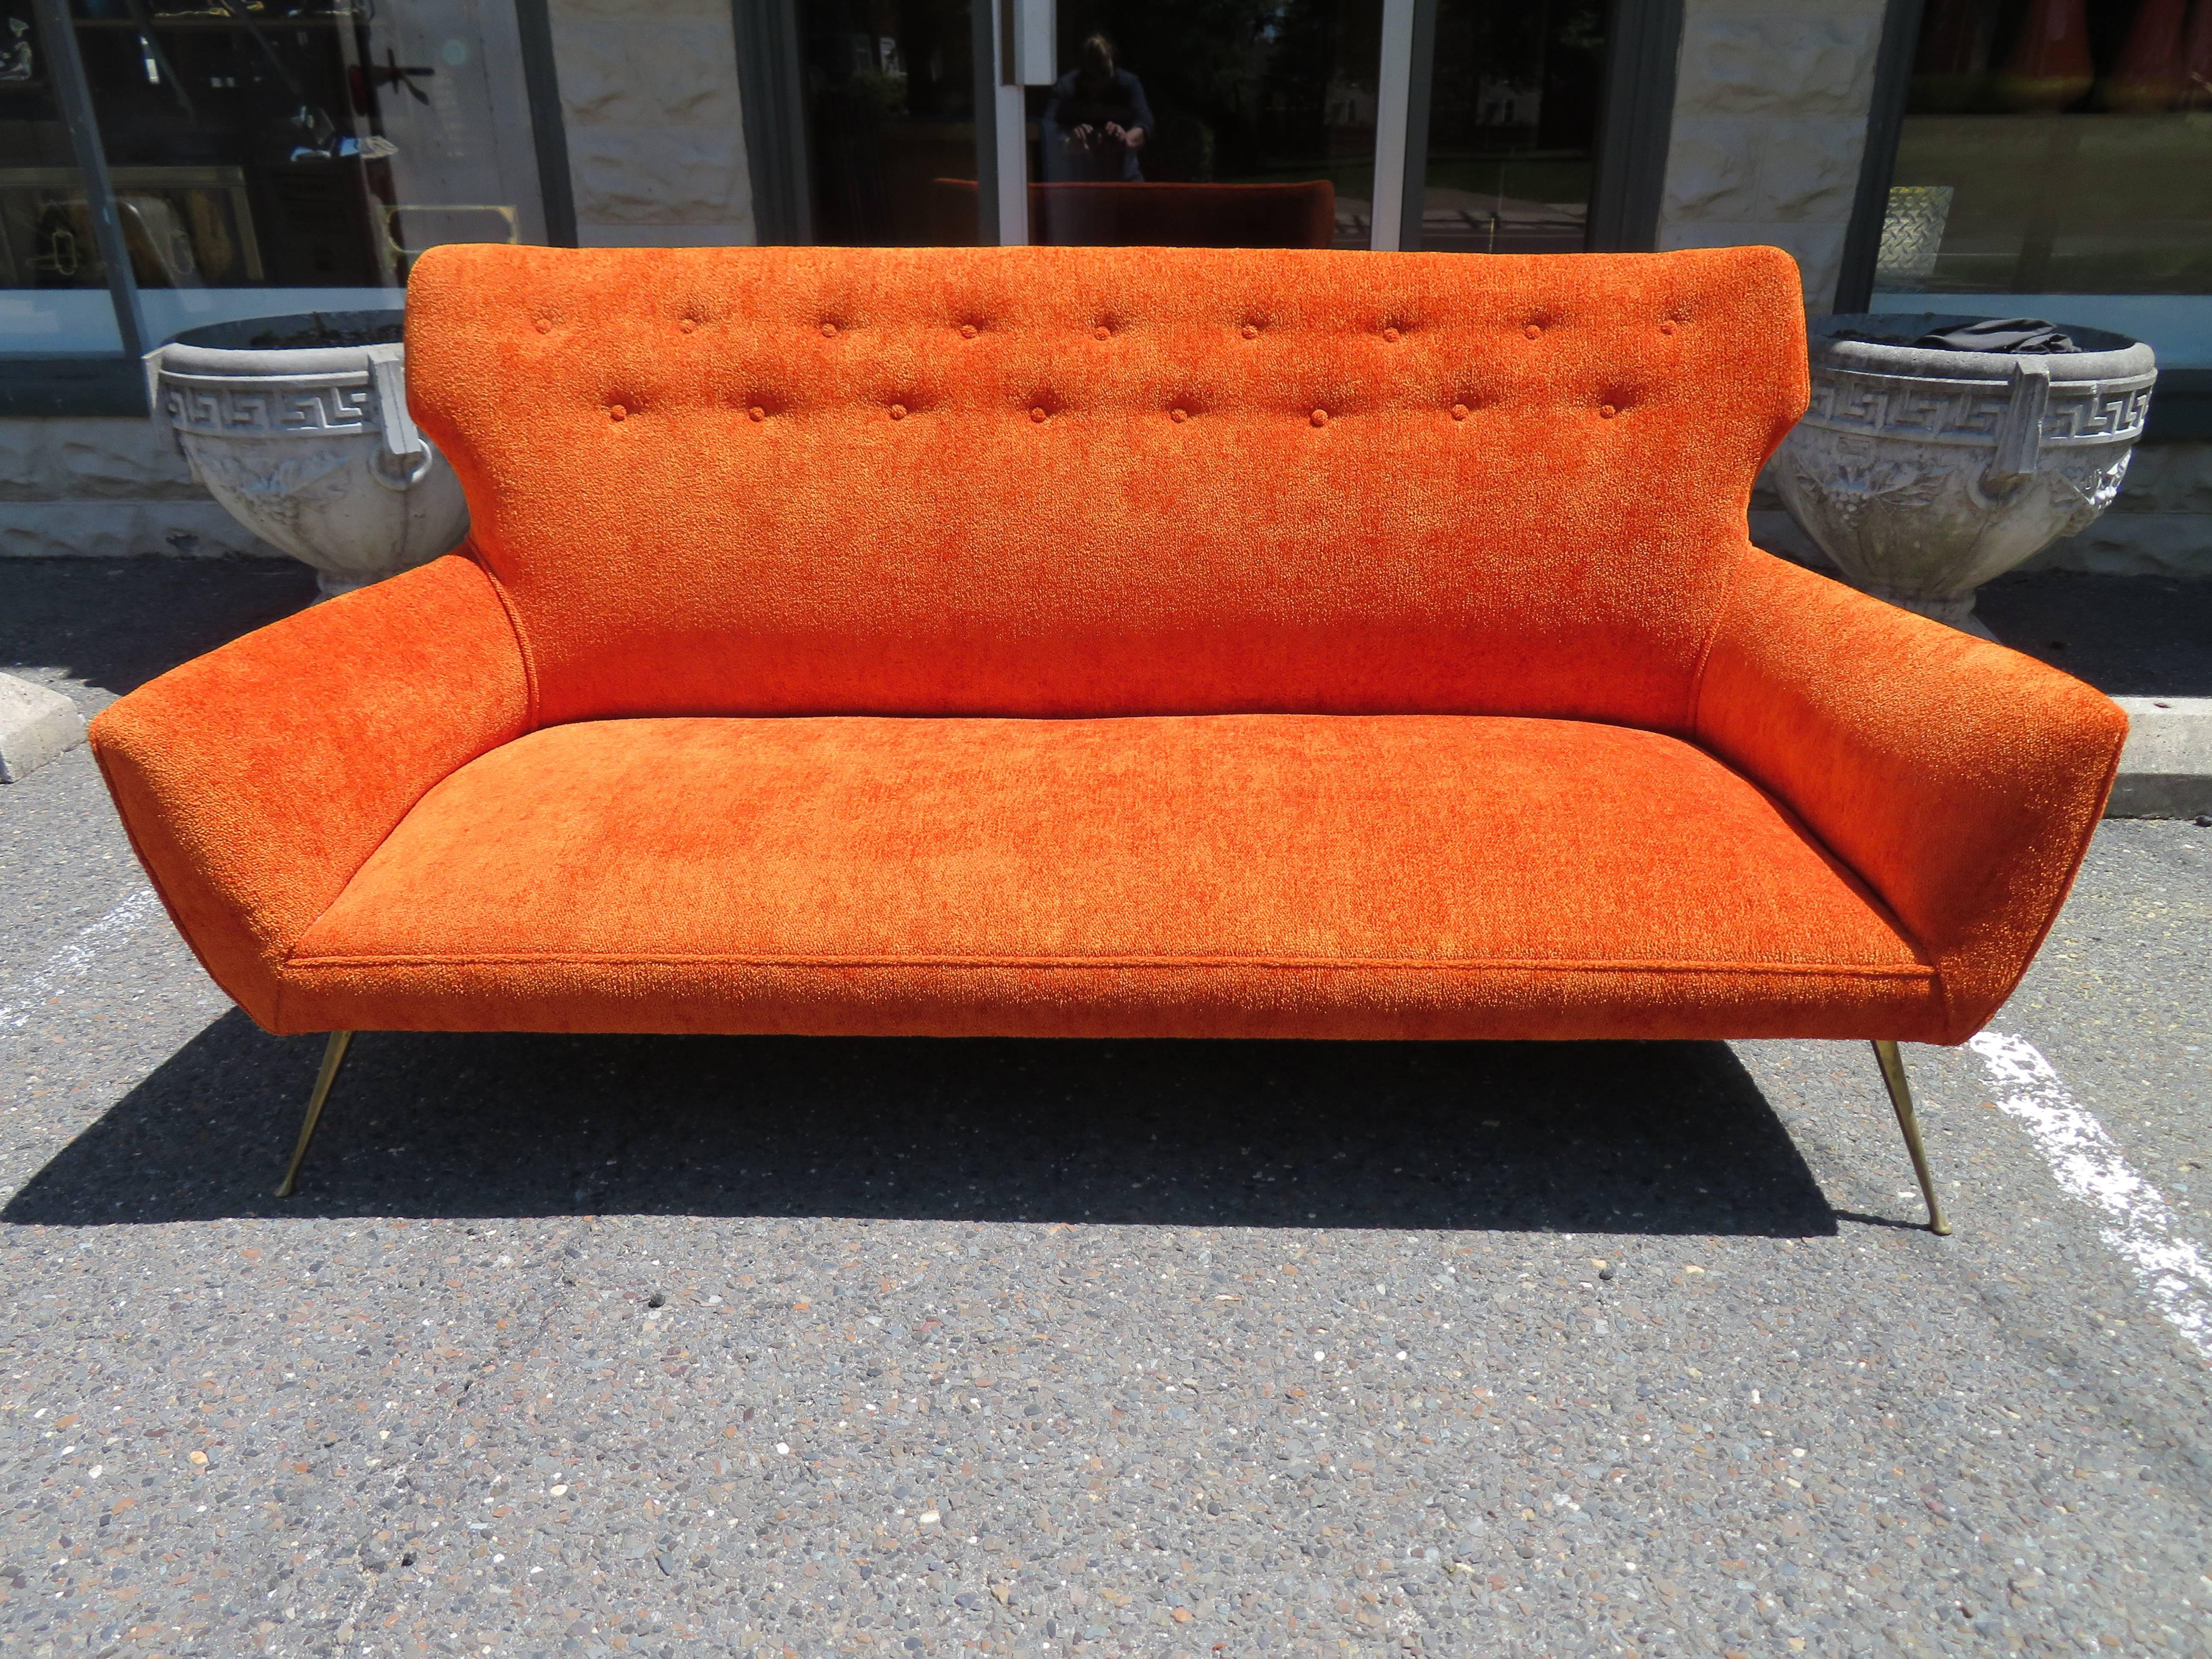 Stunning Italian modern Gio Ponti inspired sofa with splendid delicate brass splayed legs. The original vibrant orange chenille style fabric is still in wonderful condition and the foam and straps are very comfortable also. This is one of those